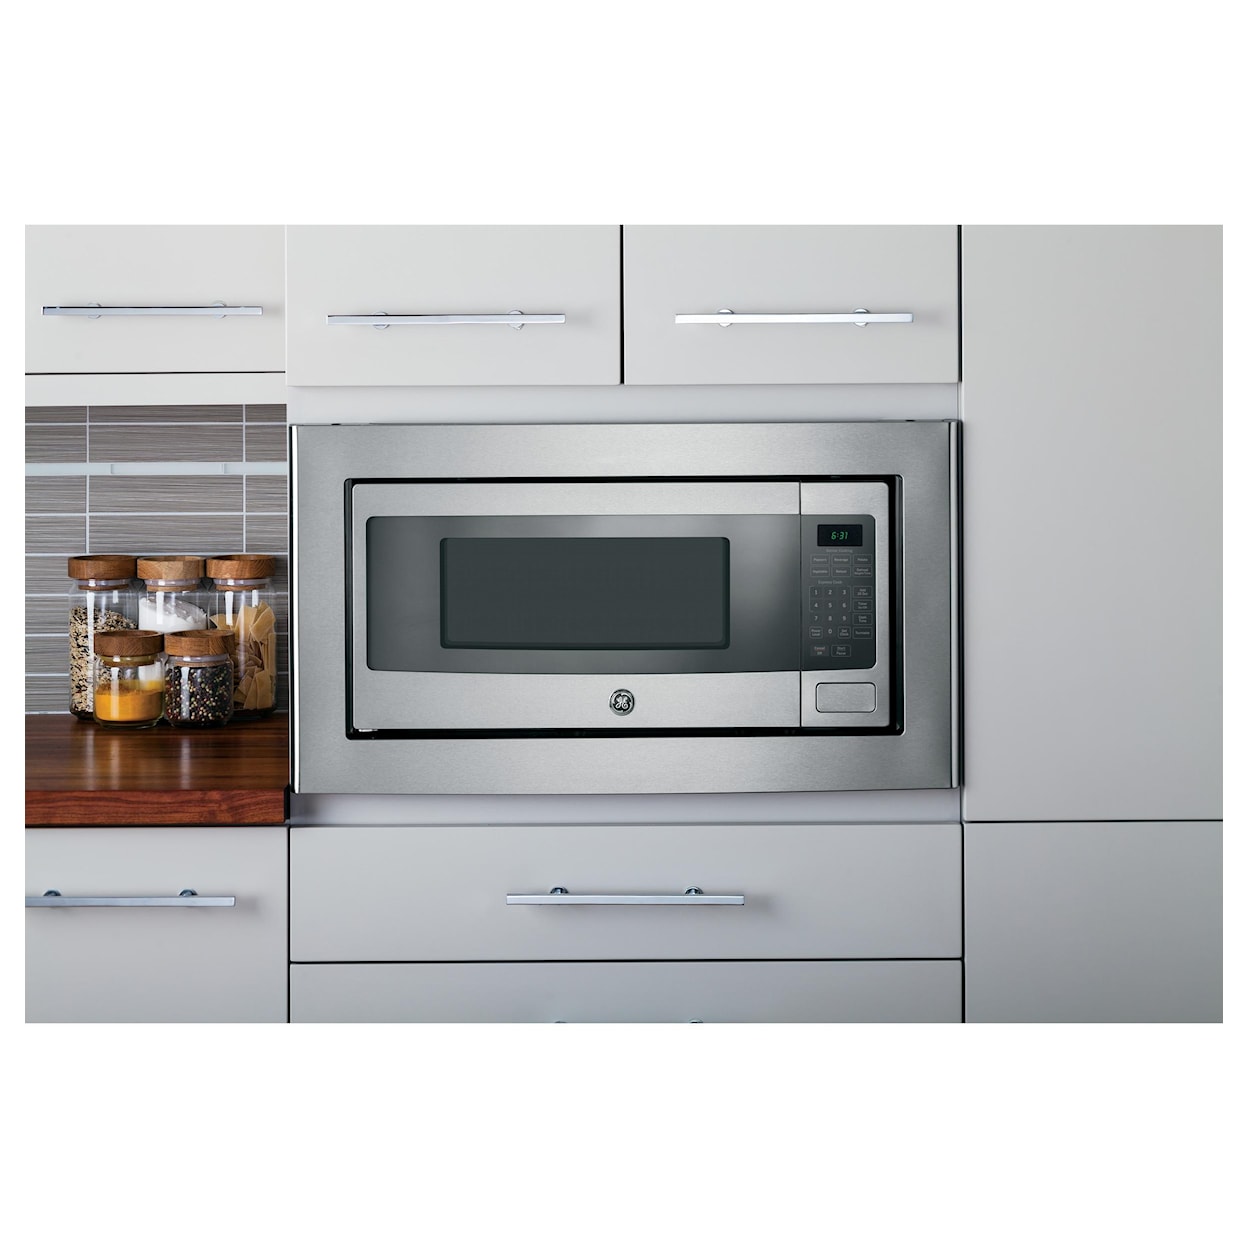 GE Appliances Microwaves  1.1 Cu. Ft. Countertop Microwave Oven